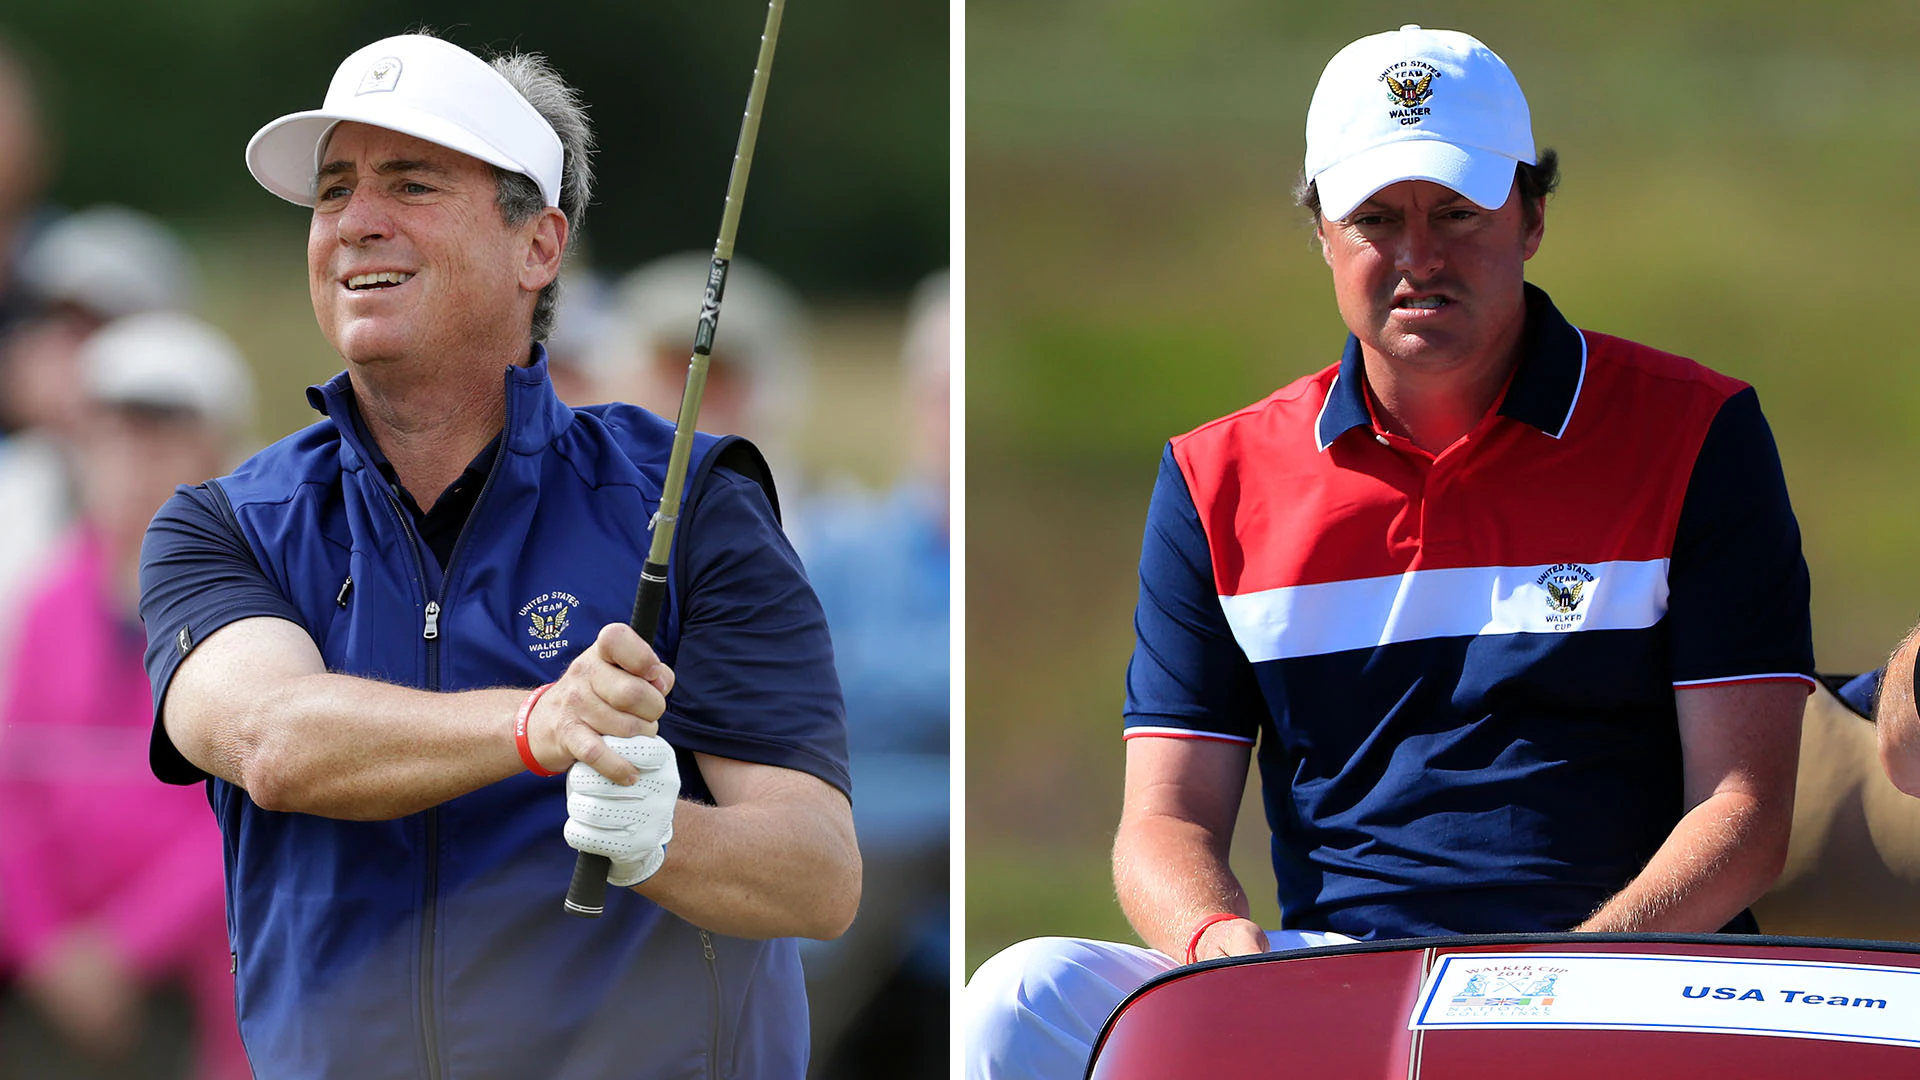 USGA tabs Mike McCoy, Nathan Smith as next two U.S. Walker Cup captains